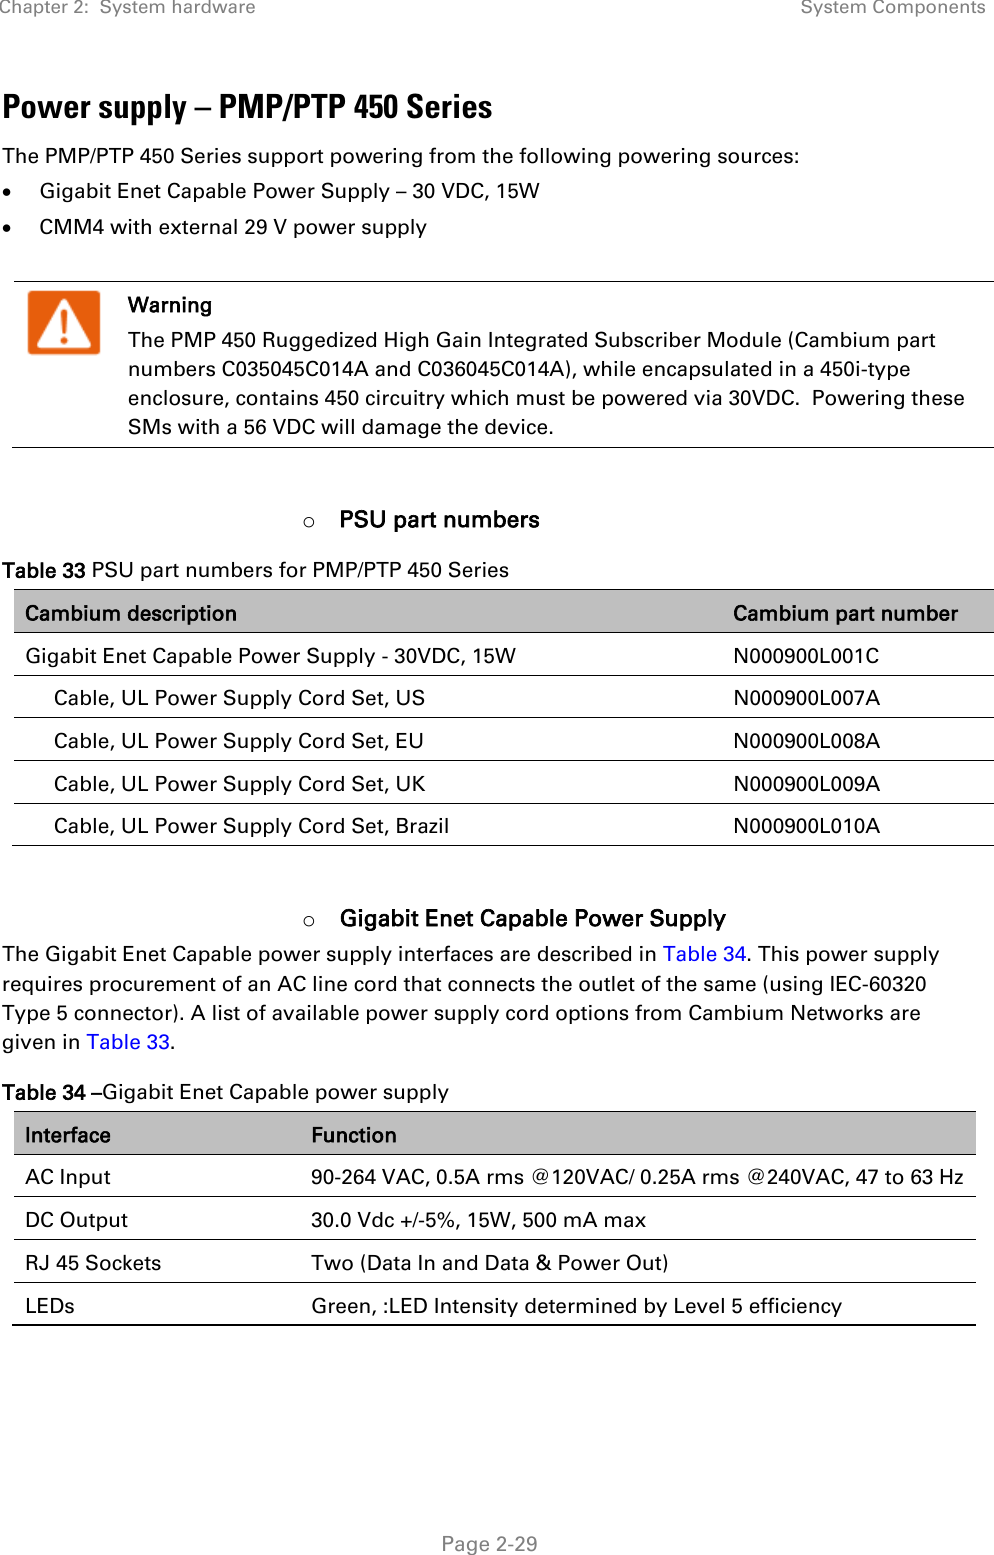 Chapter 2:  System hardware System Components   Page 2-29 Power supply – PMP/PTP 450 Series The PMP/PTP 450 Series support powering from the following powering sources: • Gigabit Enet Capable Power Supply – 30 VDC, 15W  • CMM4 with external 29 V power supply   Warning The PMP 450 Ruggedized High Gain Integrated Subscriber Module (Cambium part numbers C035045C014A and C036045C014A), while encapsulated in a 450i-type enclosure, contains 450 circuitry which must be powered via 30VDC.  Powering these SMs with a 56 VDC will damage the device.  o PSU part numbers Table 33 PSU part numbers for PMP/PTP 450 Series Cambium description Cambium part number Gigabit Enet Capable Power Supply - 30VDC, 15W N000900L001C      Cable, UL Power Supply Cord Set, US N000900L007A      Cable, UL Power Supply Cord Set, EU N000900L008A      Cable, UL Power Supply Cord Set, UK N000900L009A      Cable, UL Power Supply Cord Set, Brazil N000900L010A  o Gigabit Enet Capable Power Supply The Gigabit Enet Capable power supply interfaces are described in Table 34. This power supply requires procurement of an AC line cord that connects the outlet of the same (using IEC-60320 Type 5 connector). A list of available power supply cord options from Cambium Networks are given in Table 33. Table 34 –Gigabit Enet Capable power supply Interface Function AC Input  90-264 VAC, 0.5A rms @120VAC/ 0.25A rms @240VAC, 47 to 63 Hz DC Output 30.0 Vdc +/-5%, 15W, 500 mA max RJ 45 Sockets Two (Data In and Data &amp; Power Out) LEDs Green, :LED Intensity determined by Level 5 efficiency  